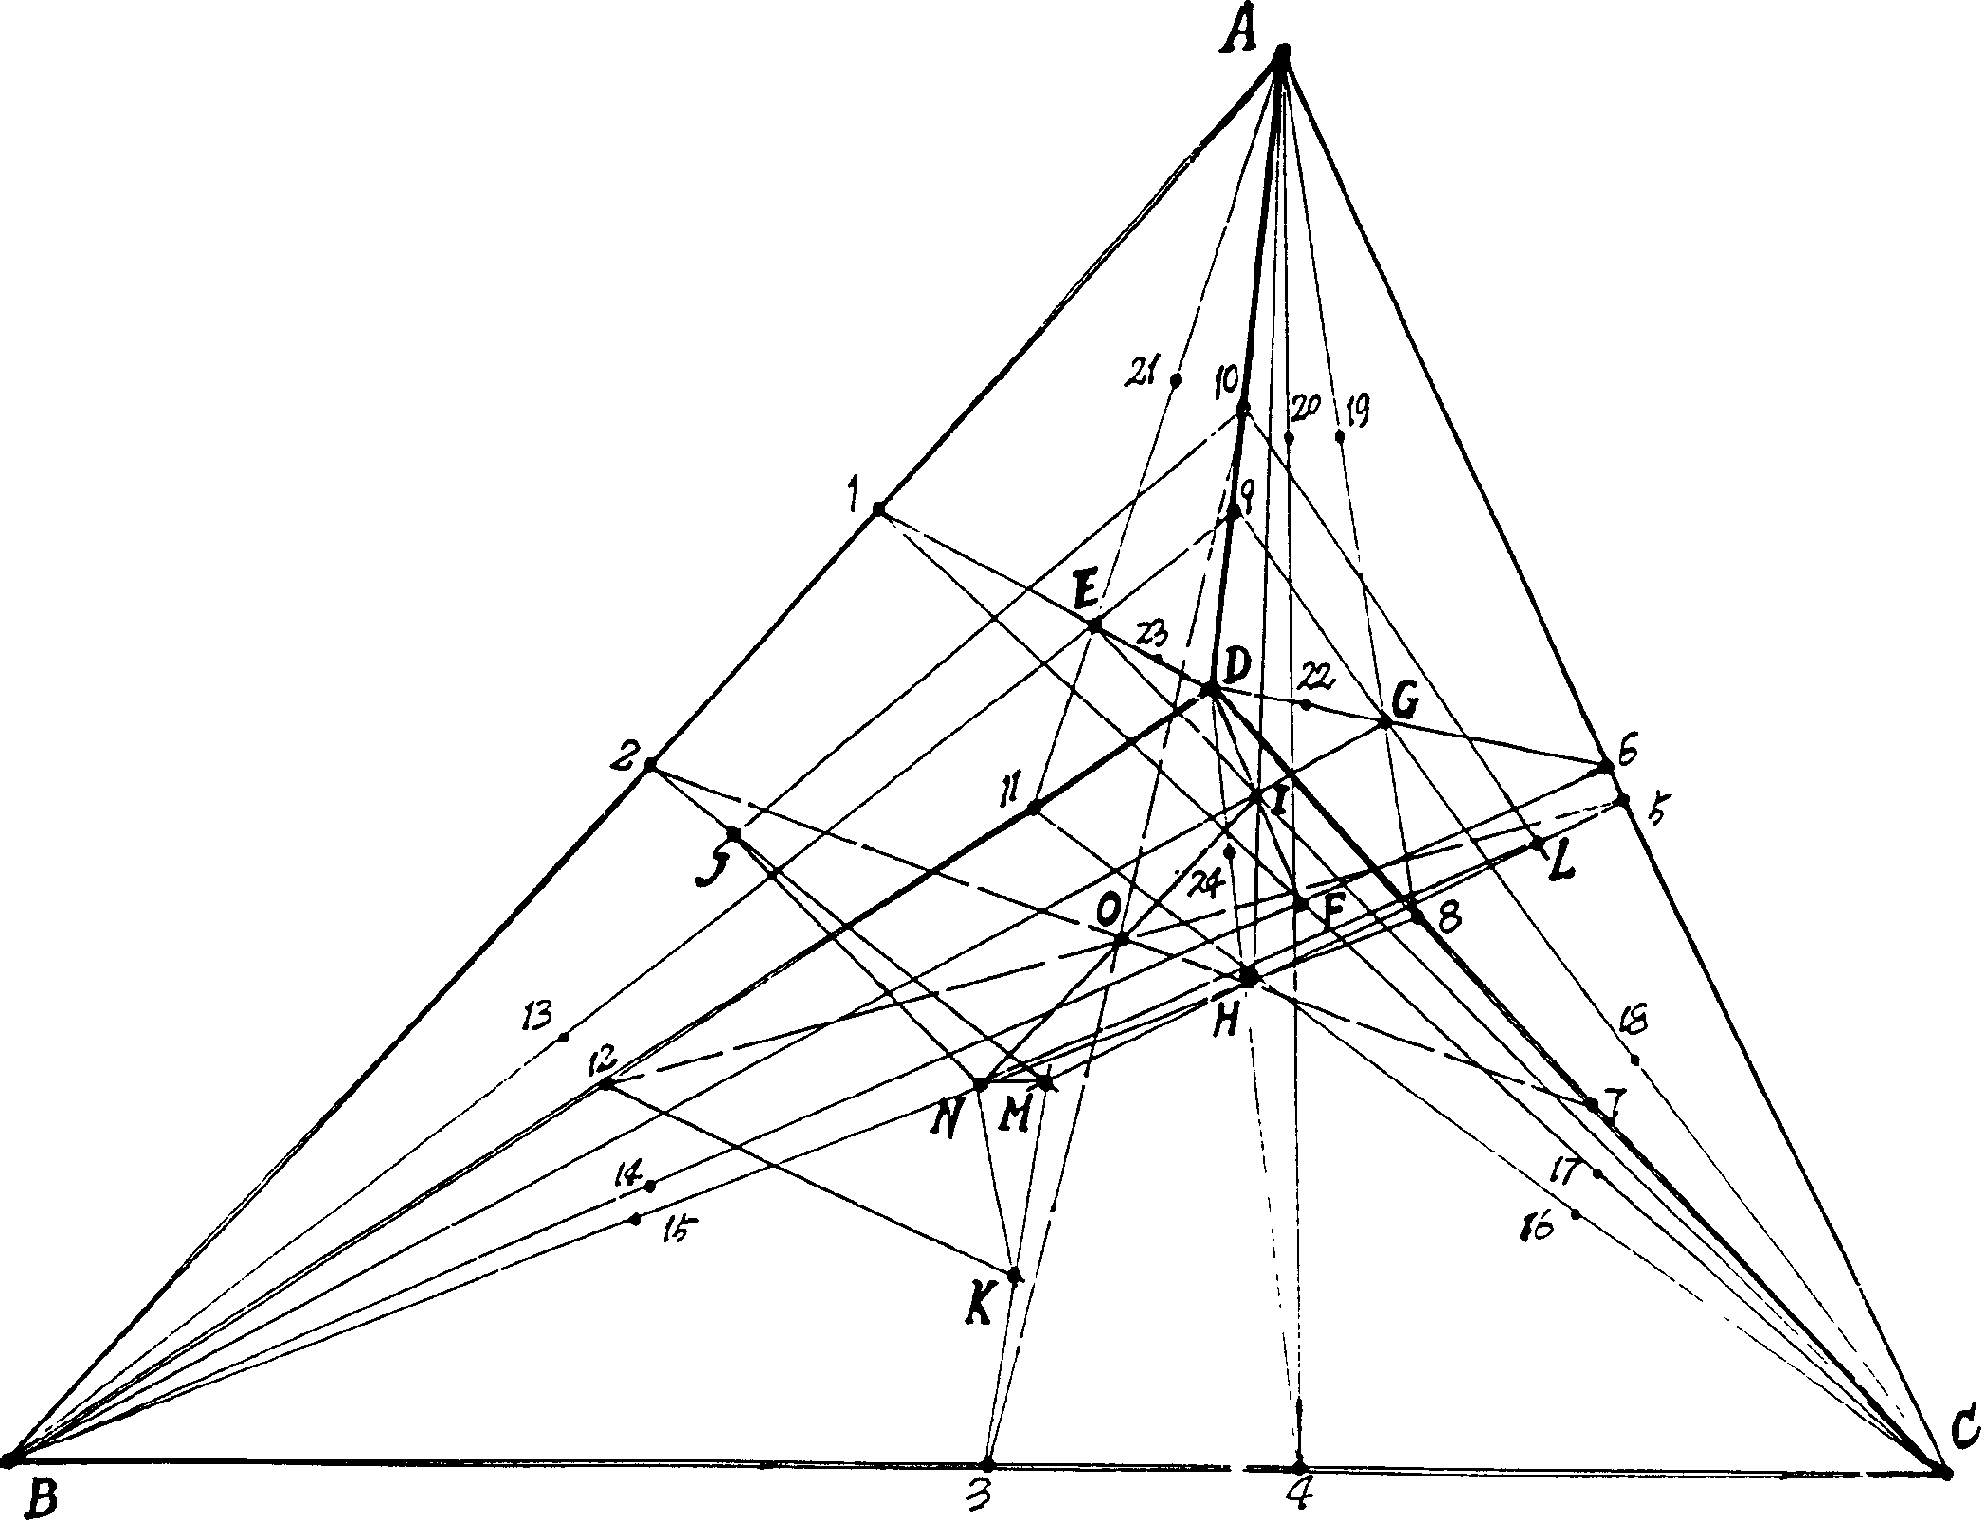 Vertical tetrahedron constructional structure system